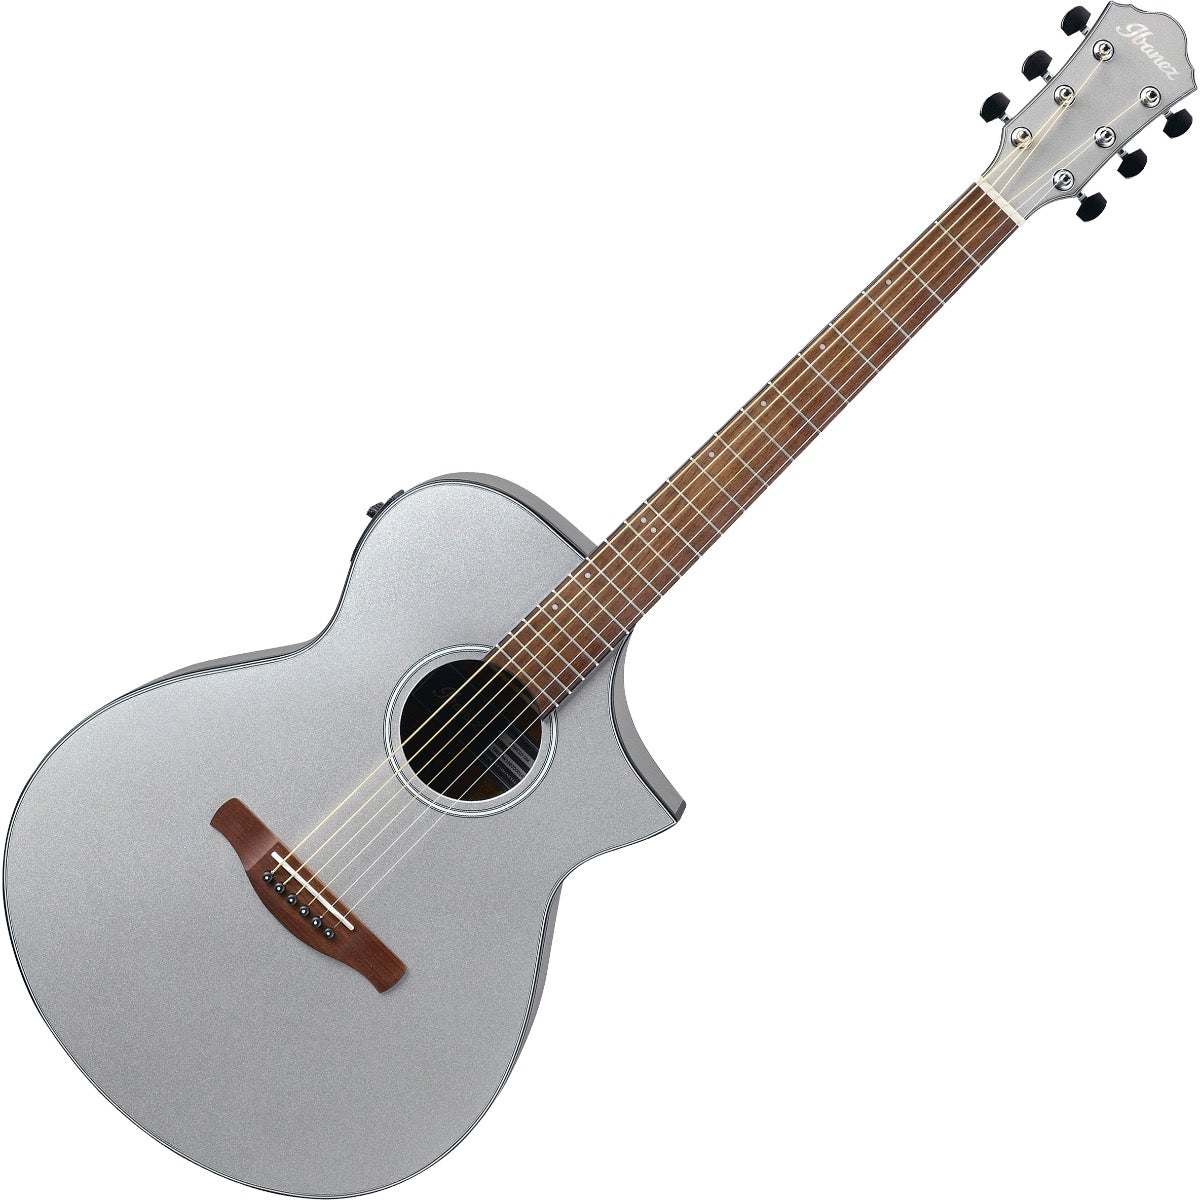 Front view of Ibanez AEWC10 Acoustic-Electric Guitar - Silver